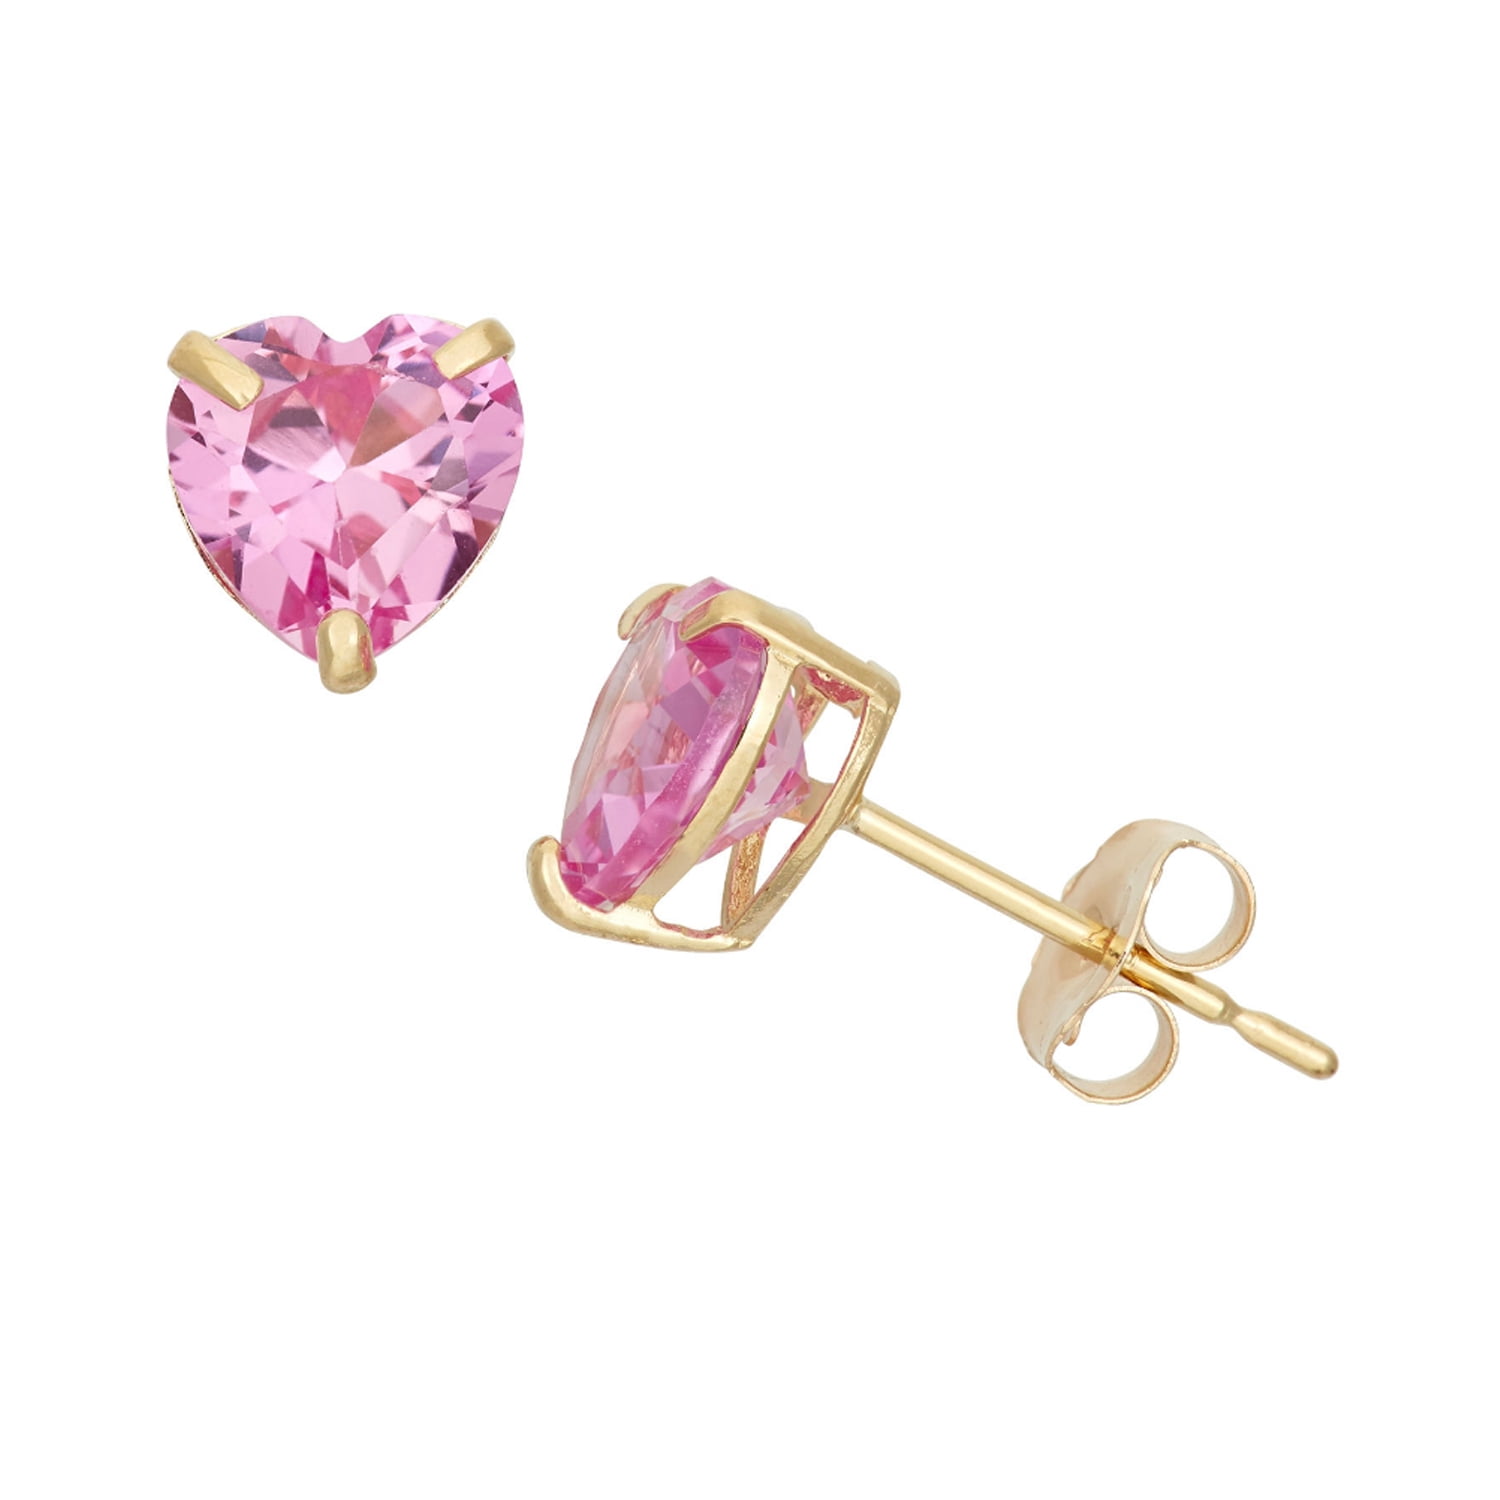 Details about   5mm OCTOBER PINK SAPPHIRE ROUND CUT STUD EARRINGS 14K Solid GOLD 